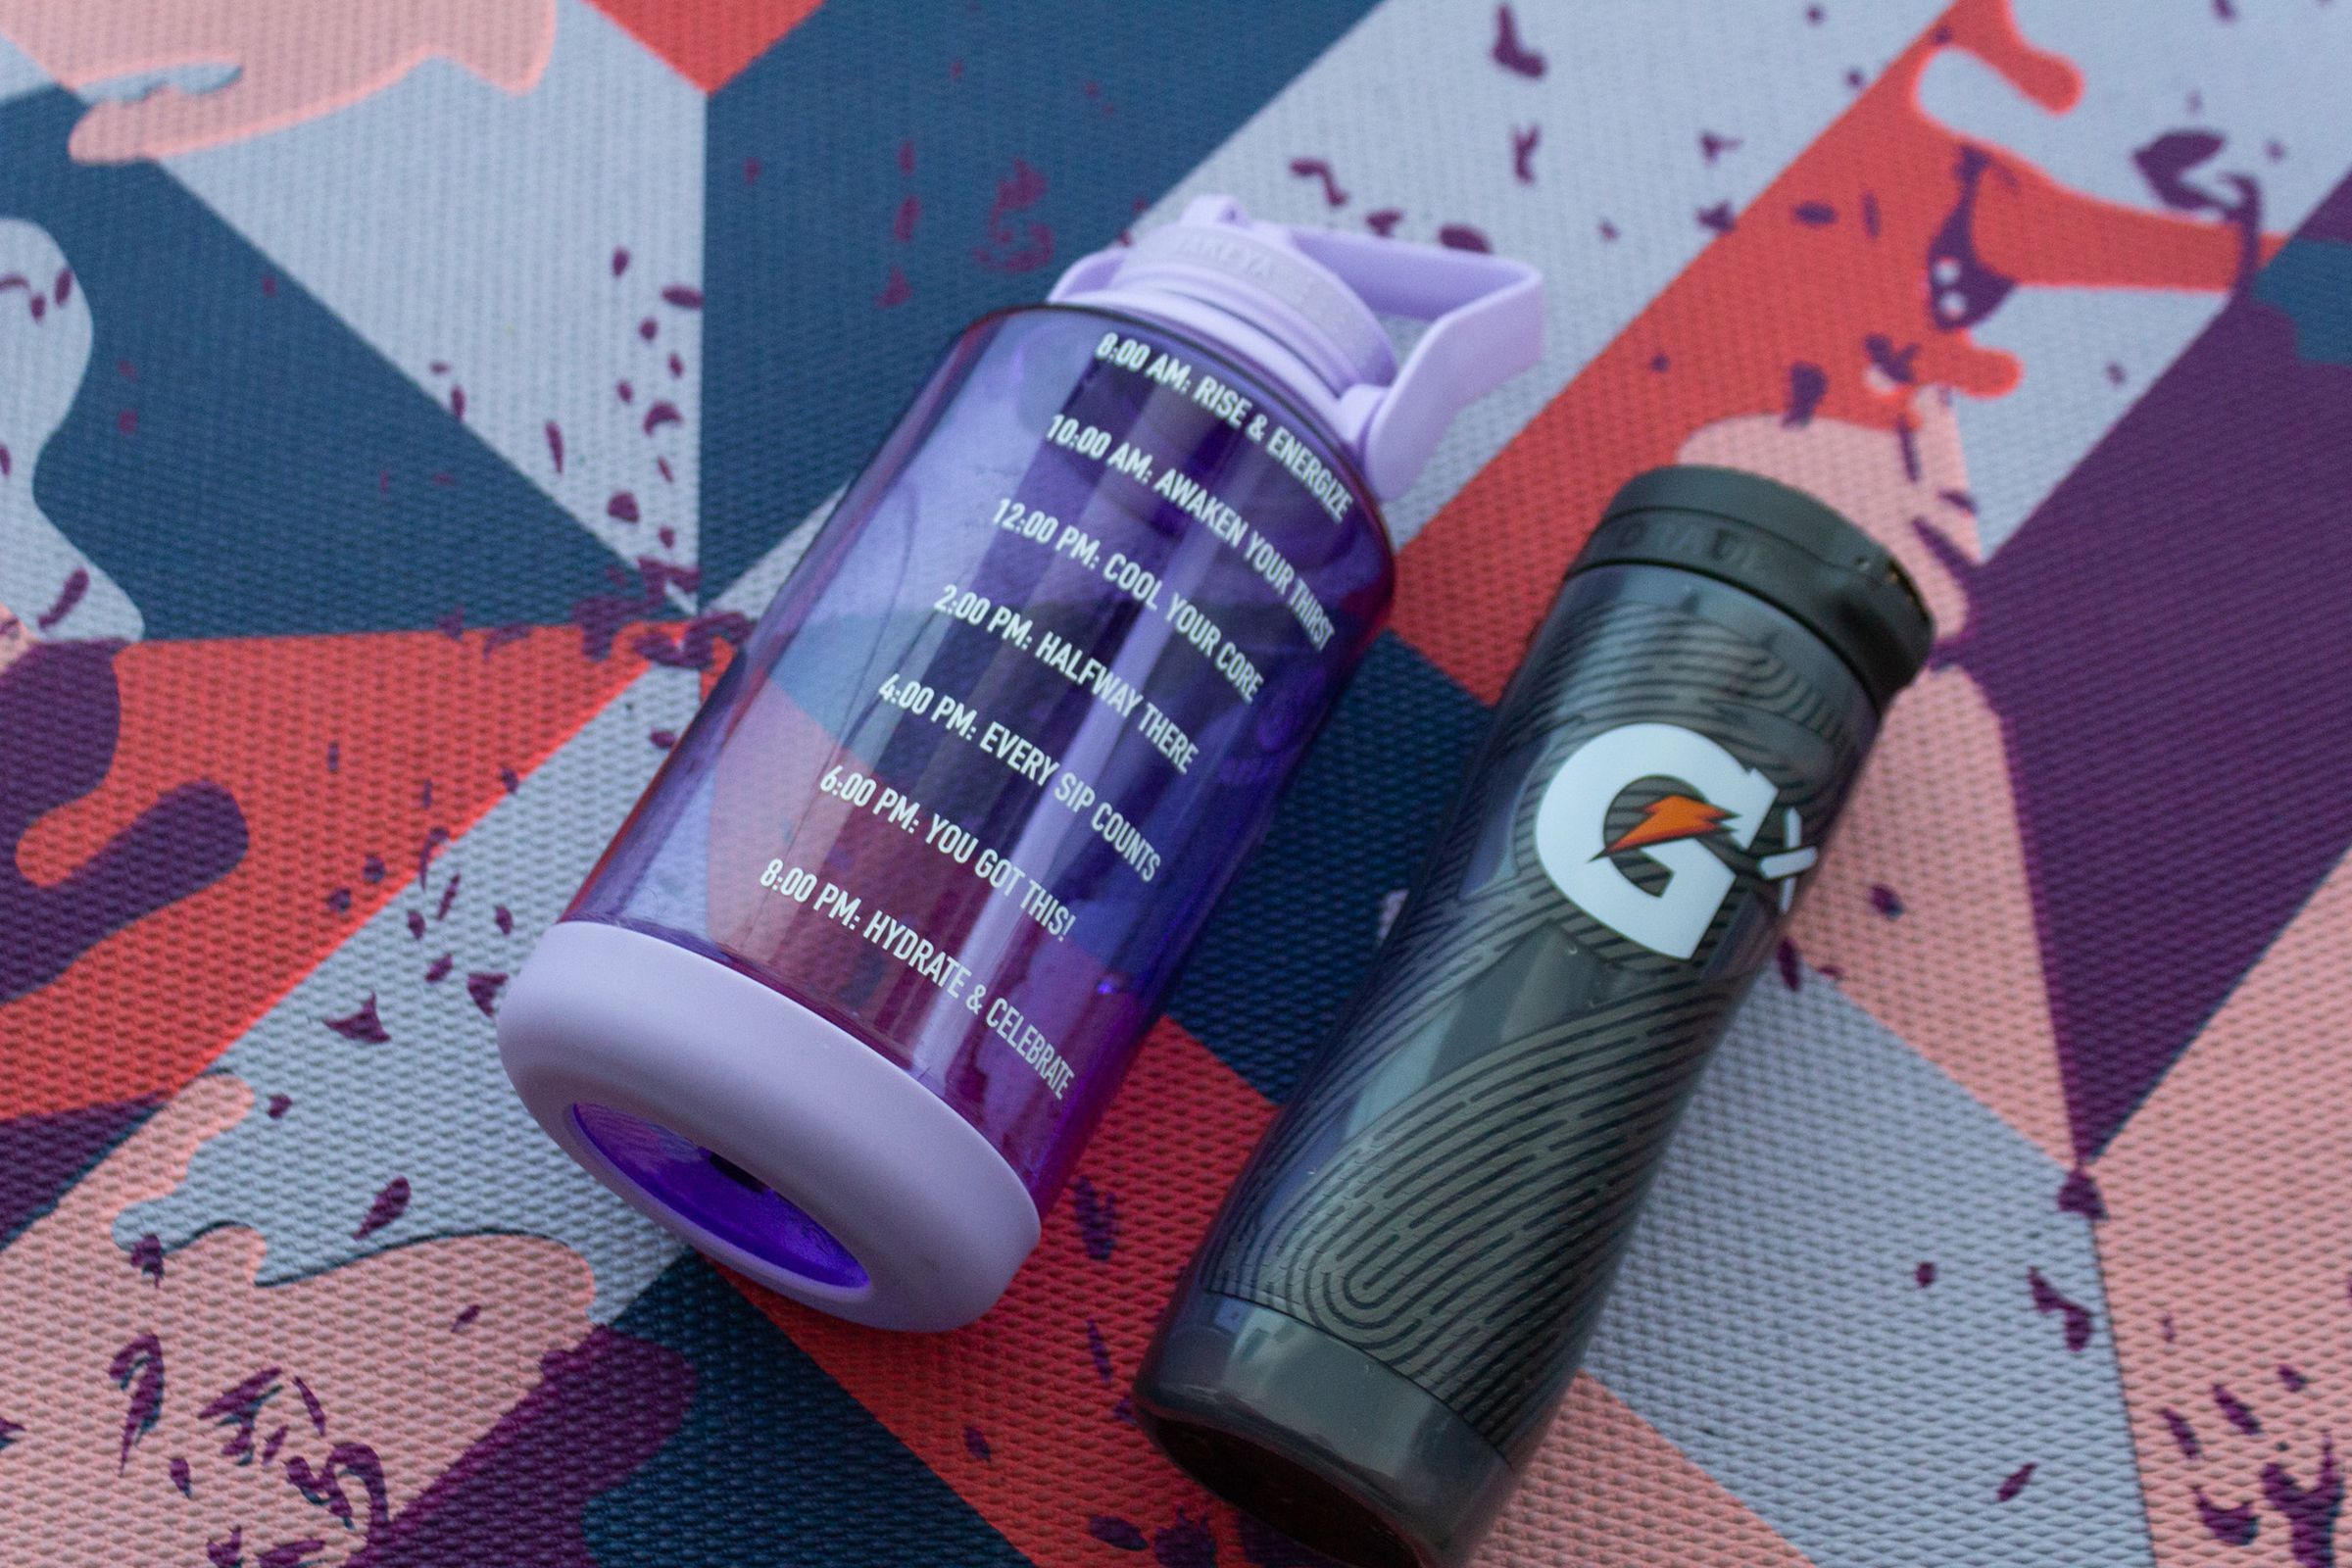 Large purple water bottle with hourly markers next to Gatorade Smart Gx bottle  